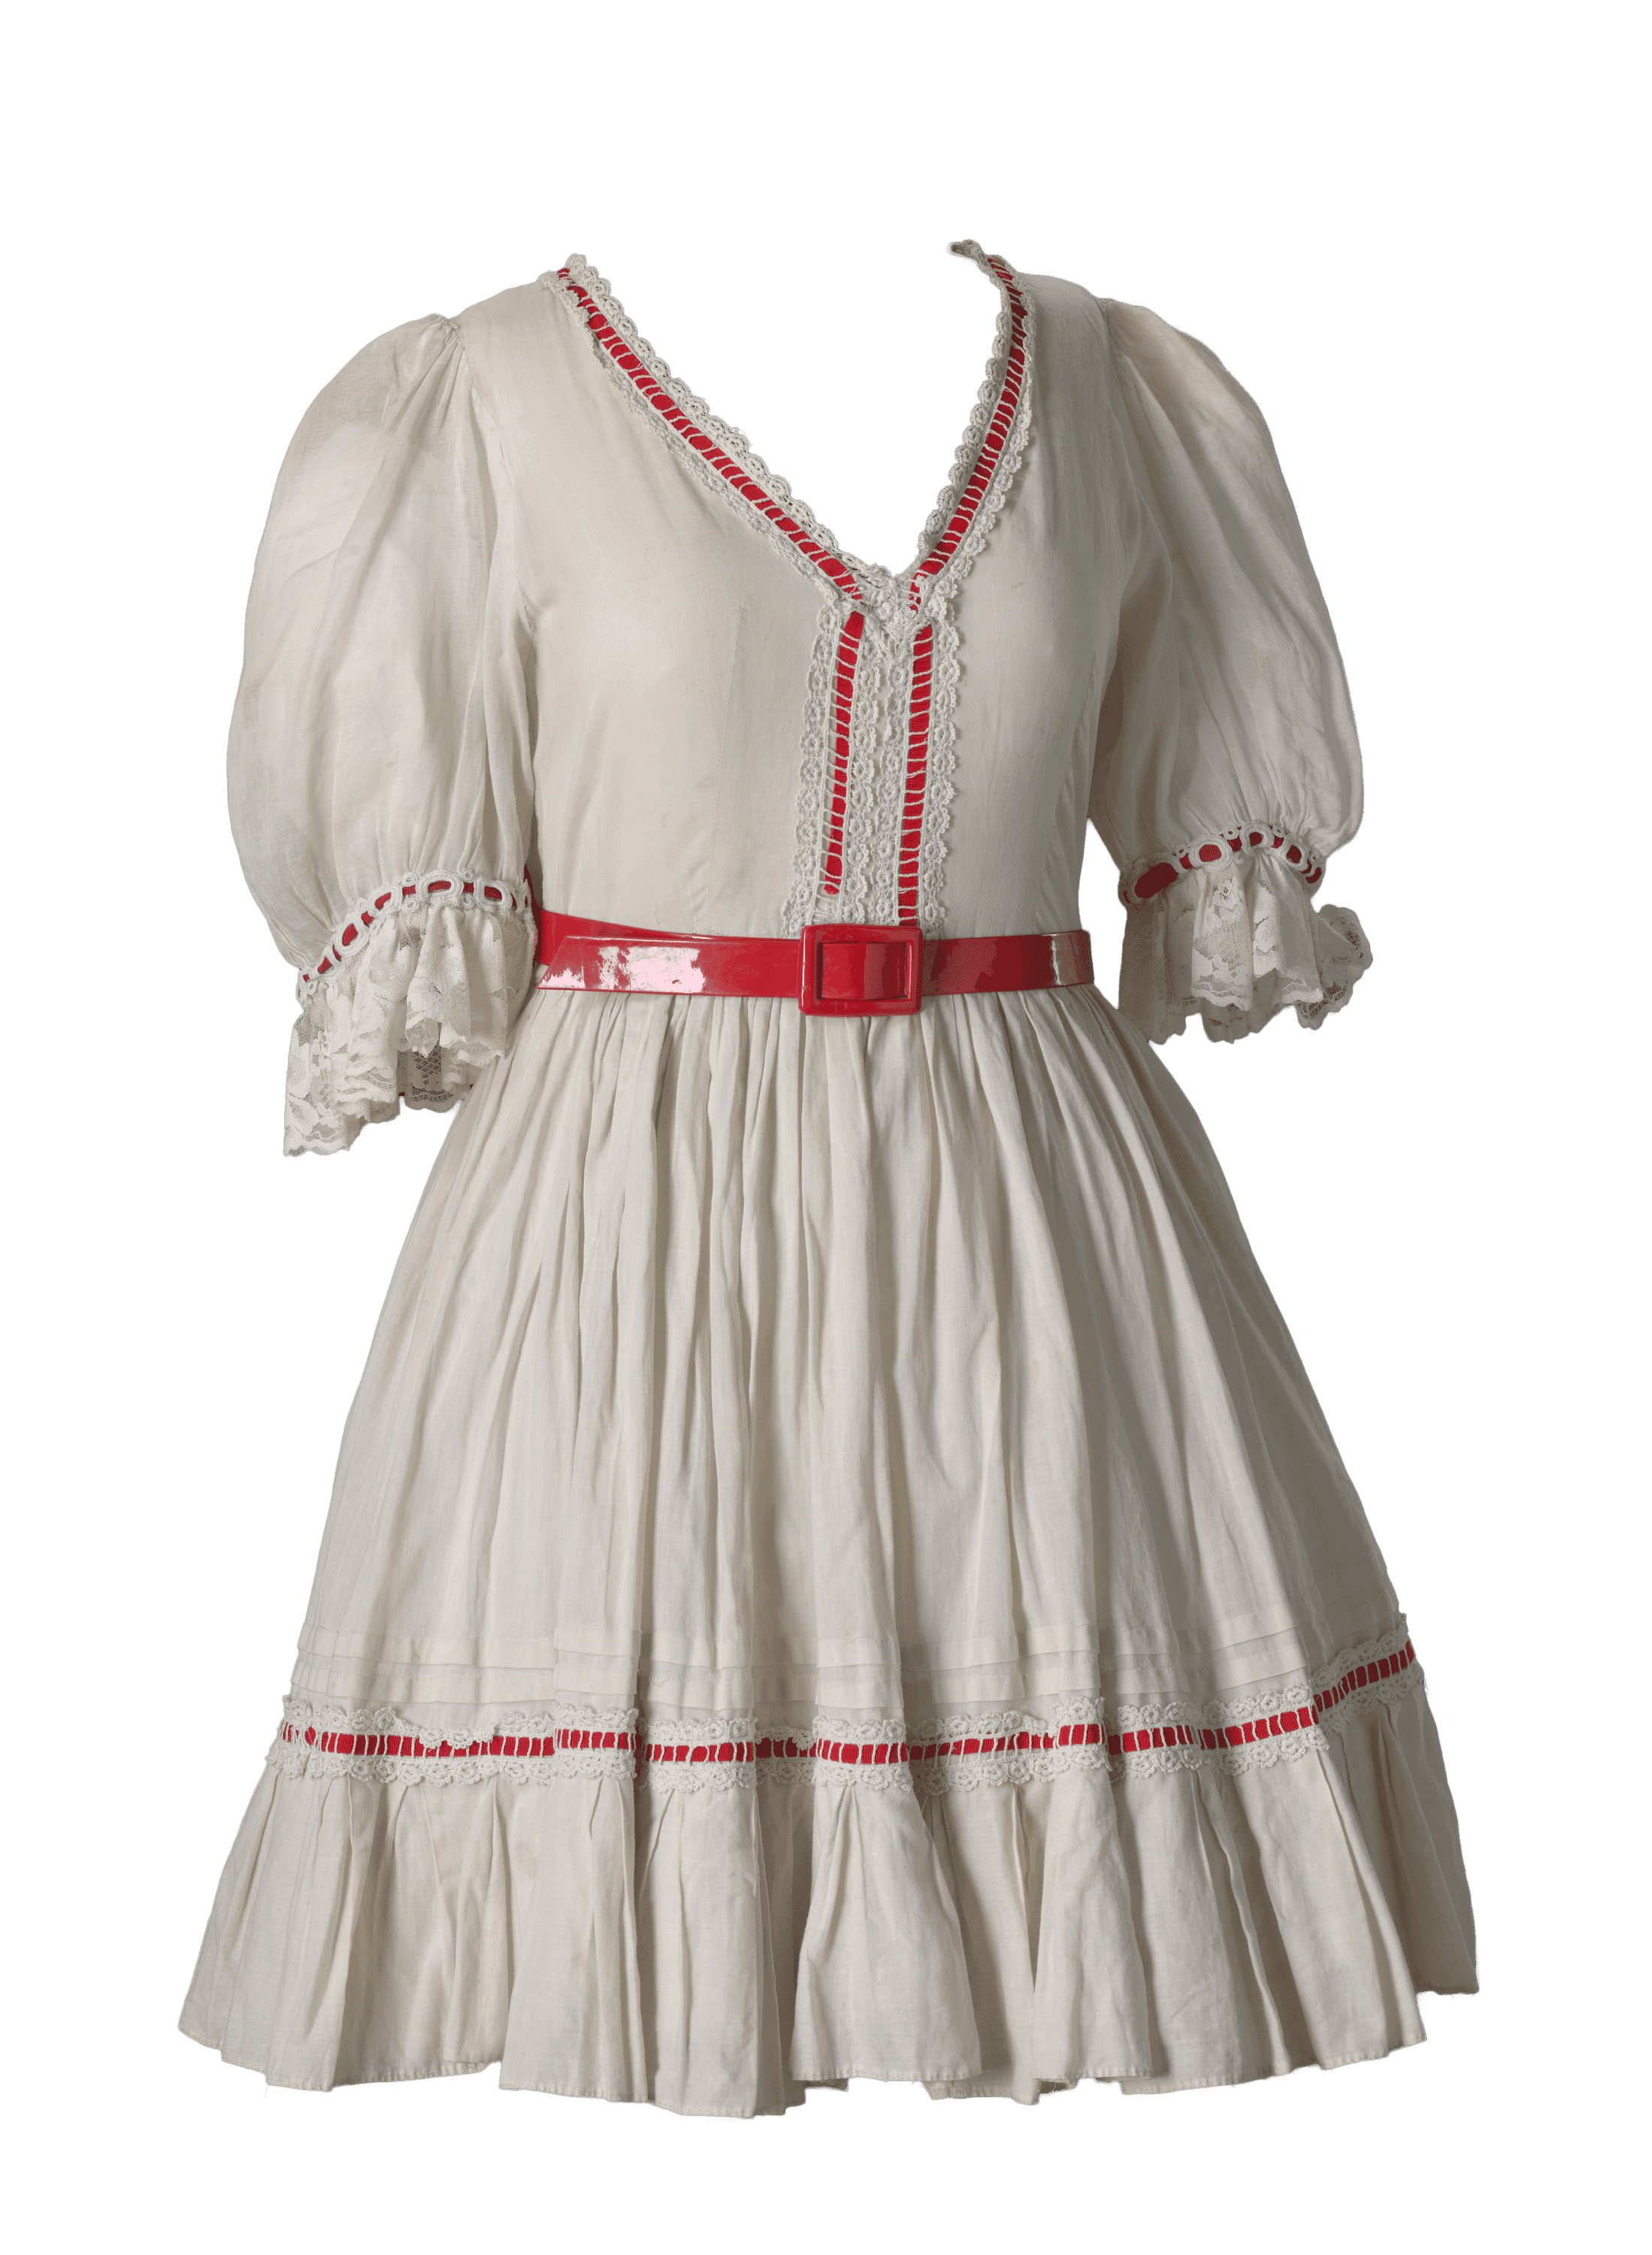 A white costume dress with a-line skirt and red belt and accent colors for Dorothy in The Wiz.